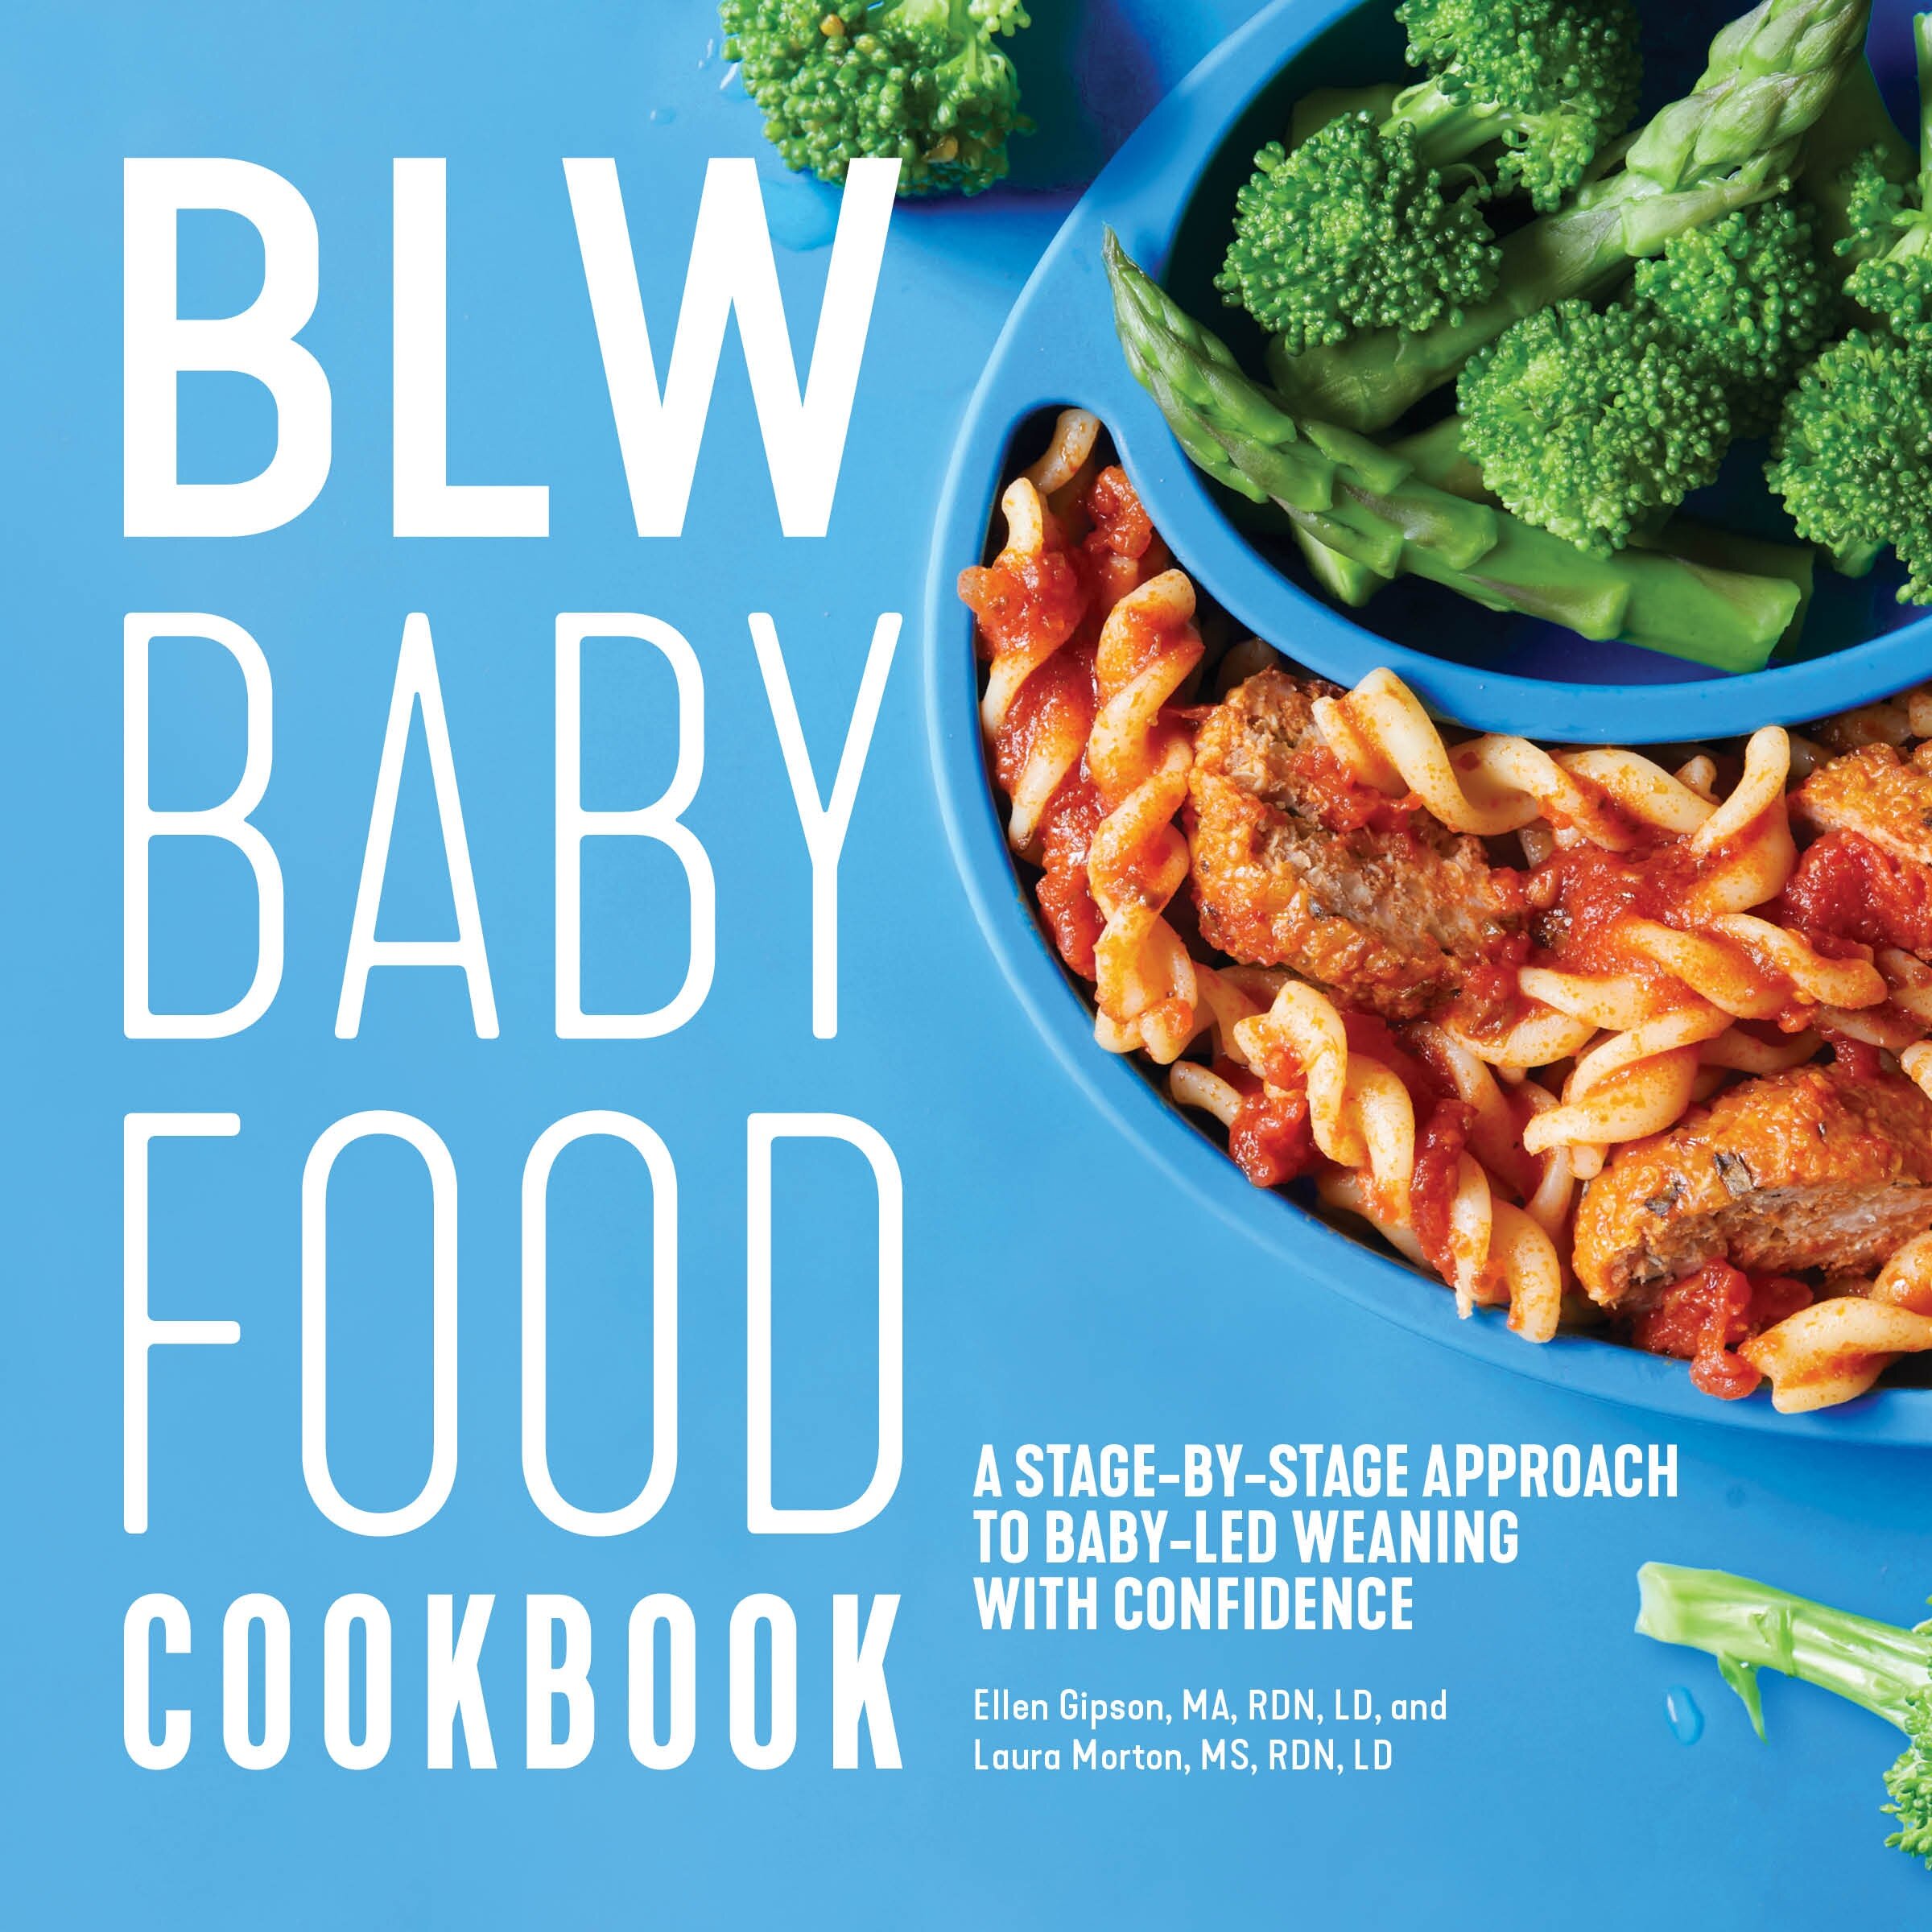 We wrote a book! The BLW Baby Food Cookbook — Morton's Grove